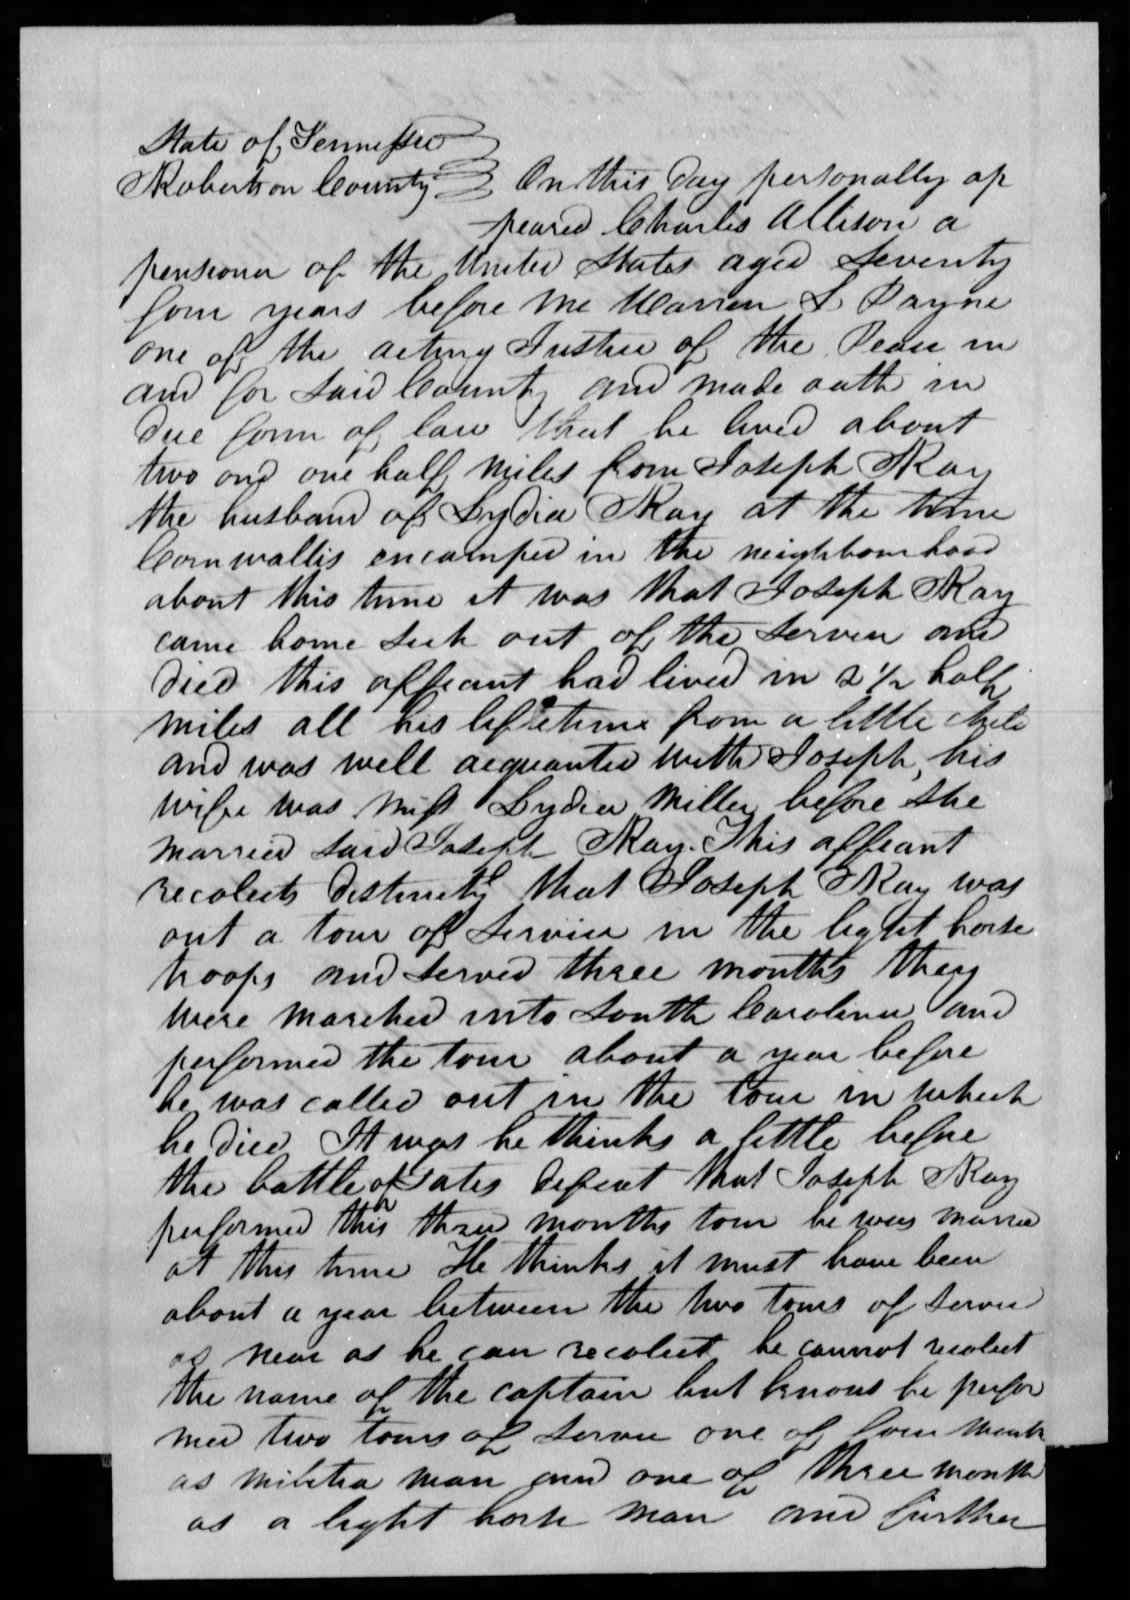 Affidavit of Charles Ellison in support of a Pension Claim for Lydia Ray, 22 October 1838, page 1